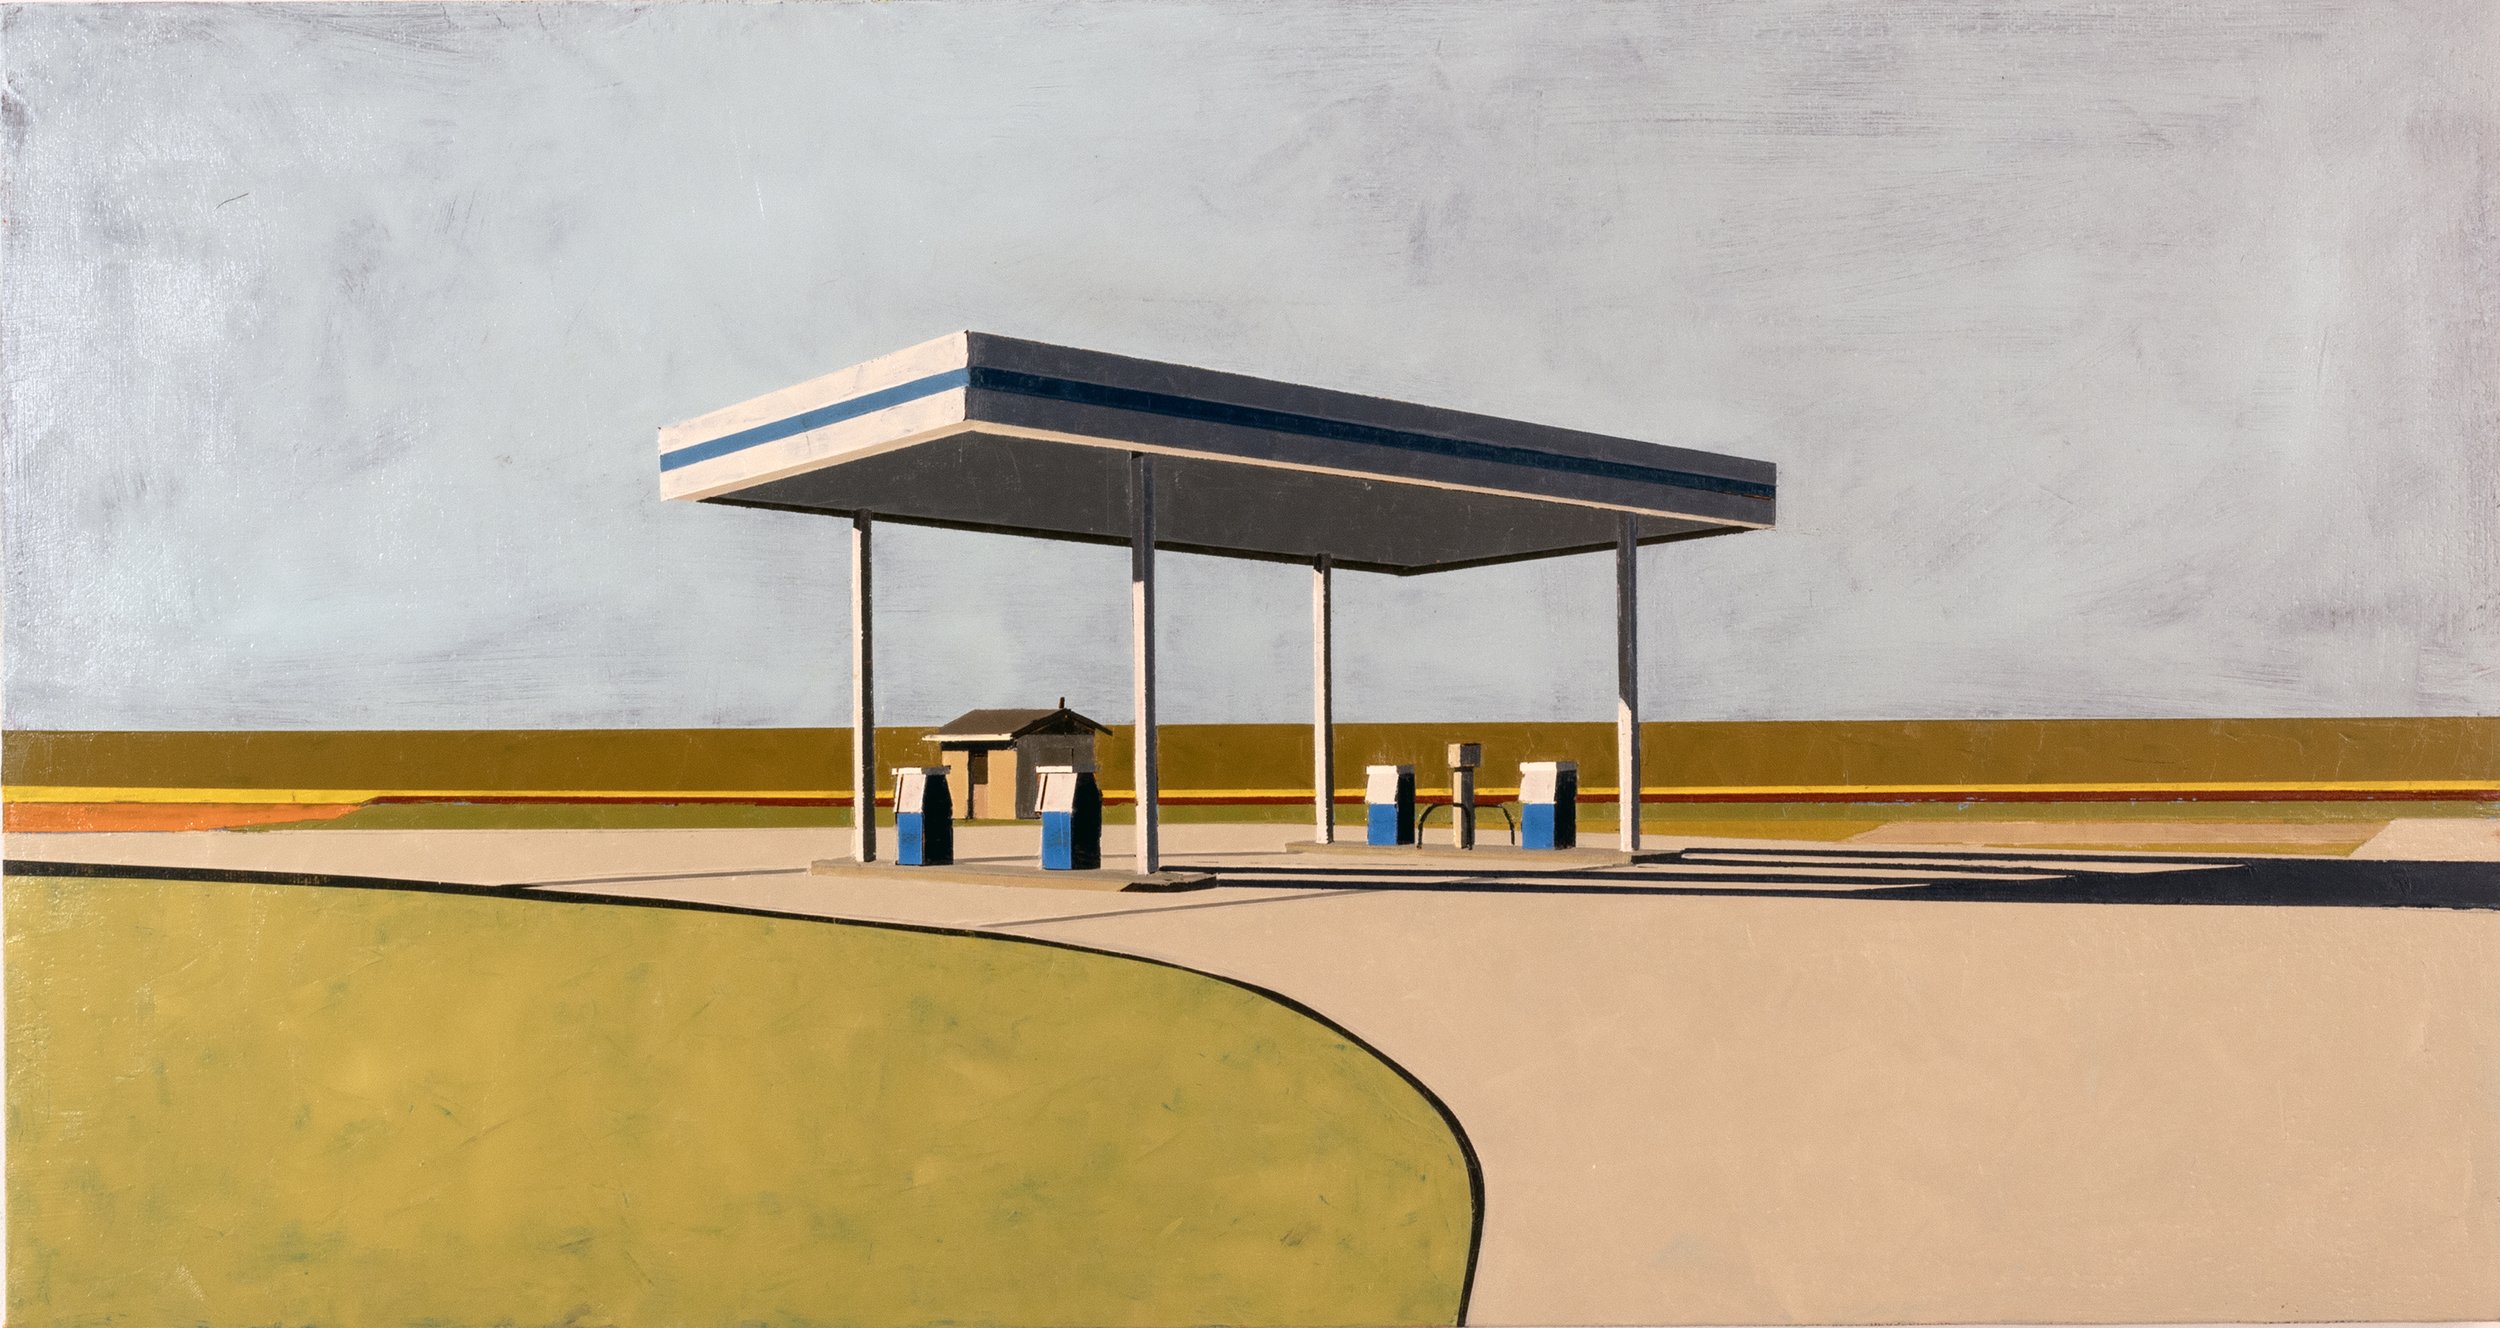   VACANCY: MCMINNVILLE 	   oil on canvas | 12”x24” | 2021    